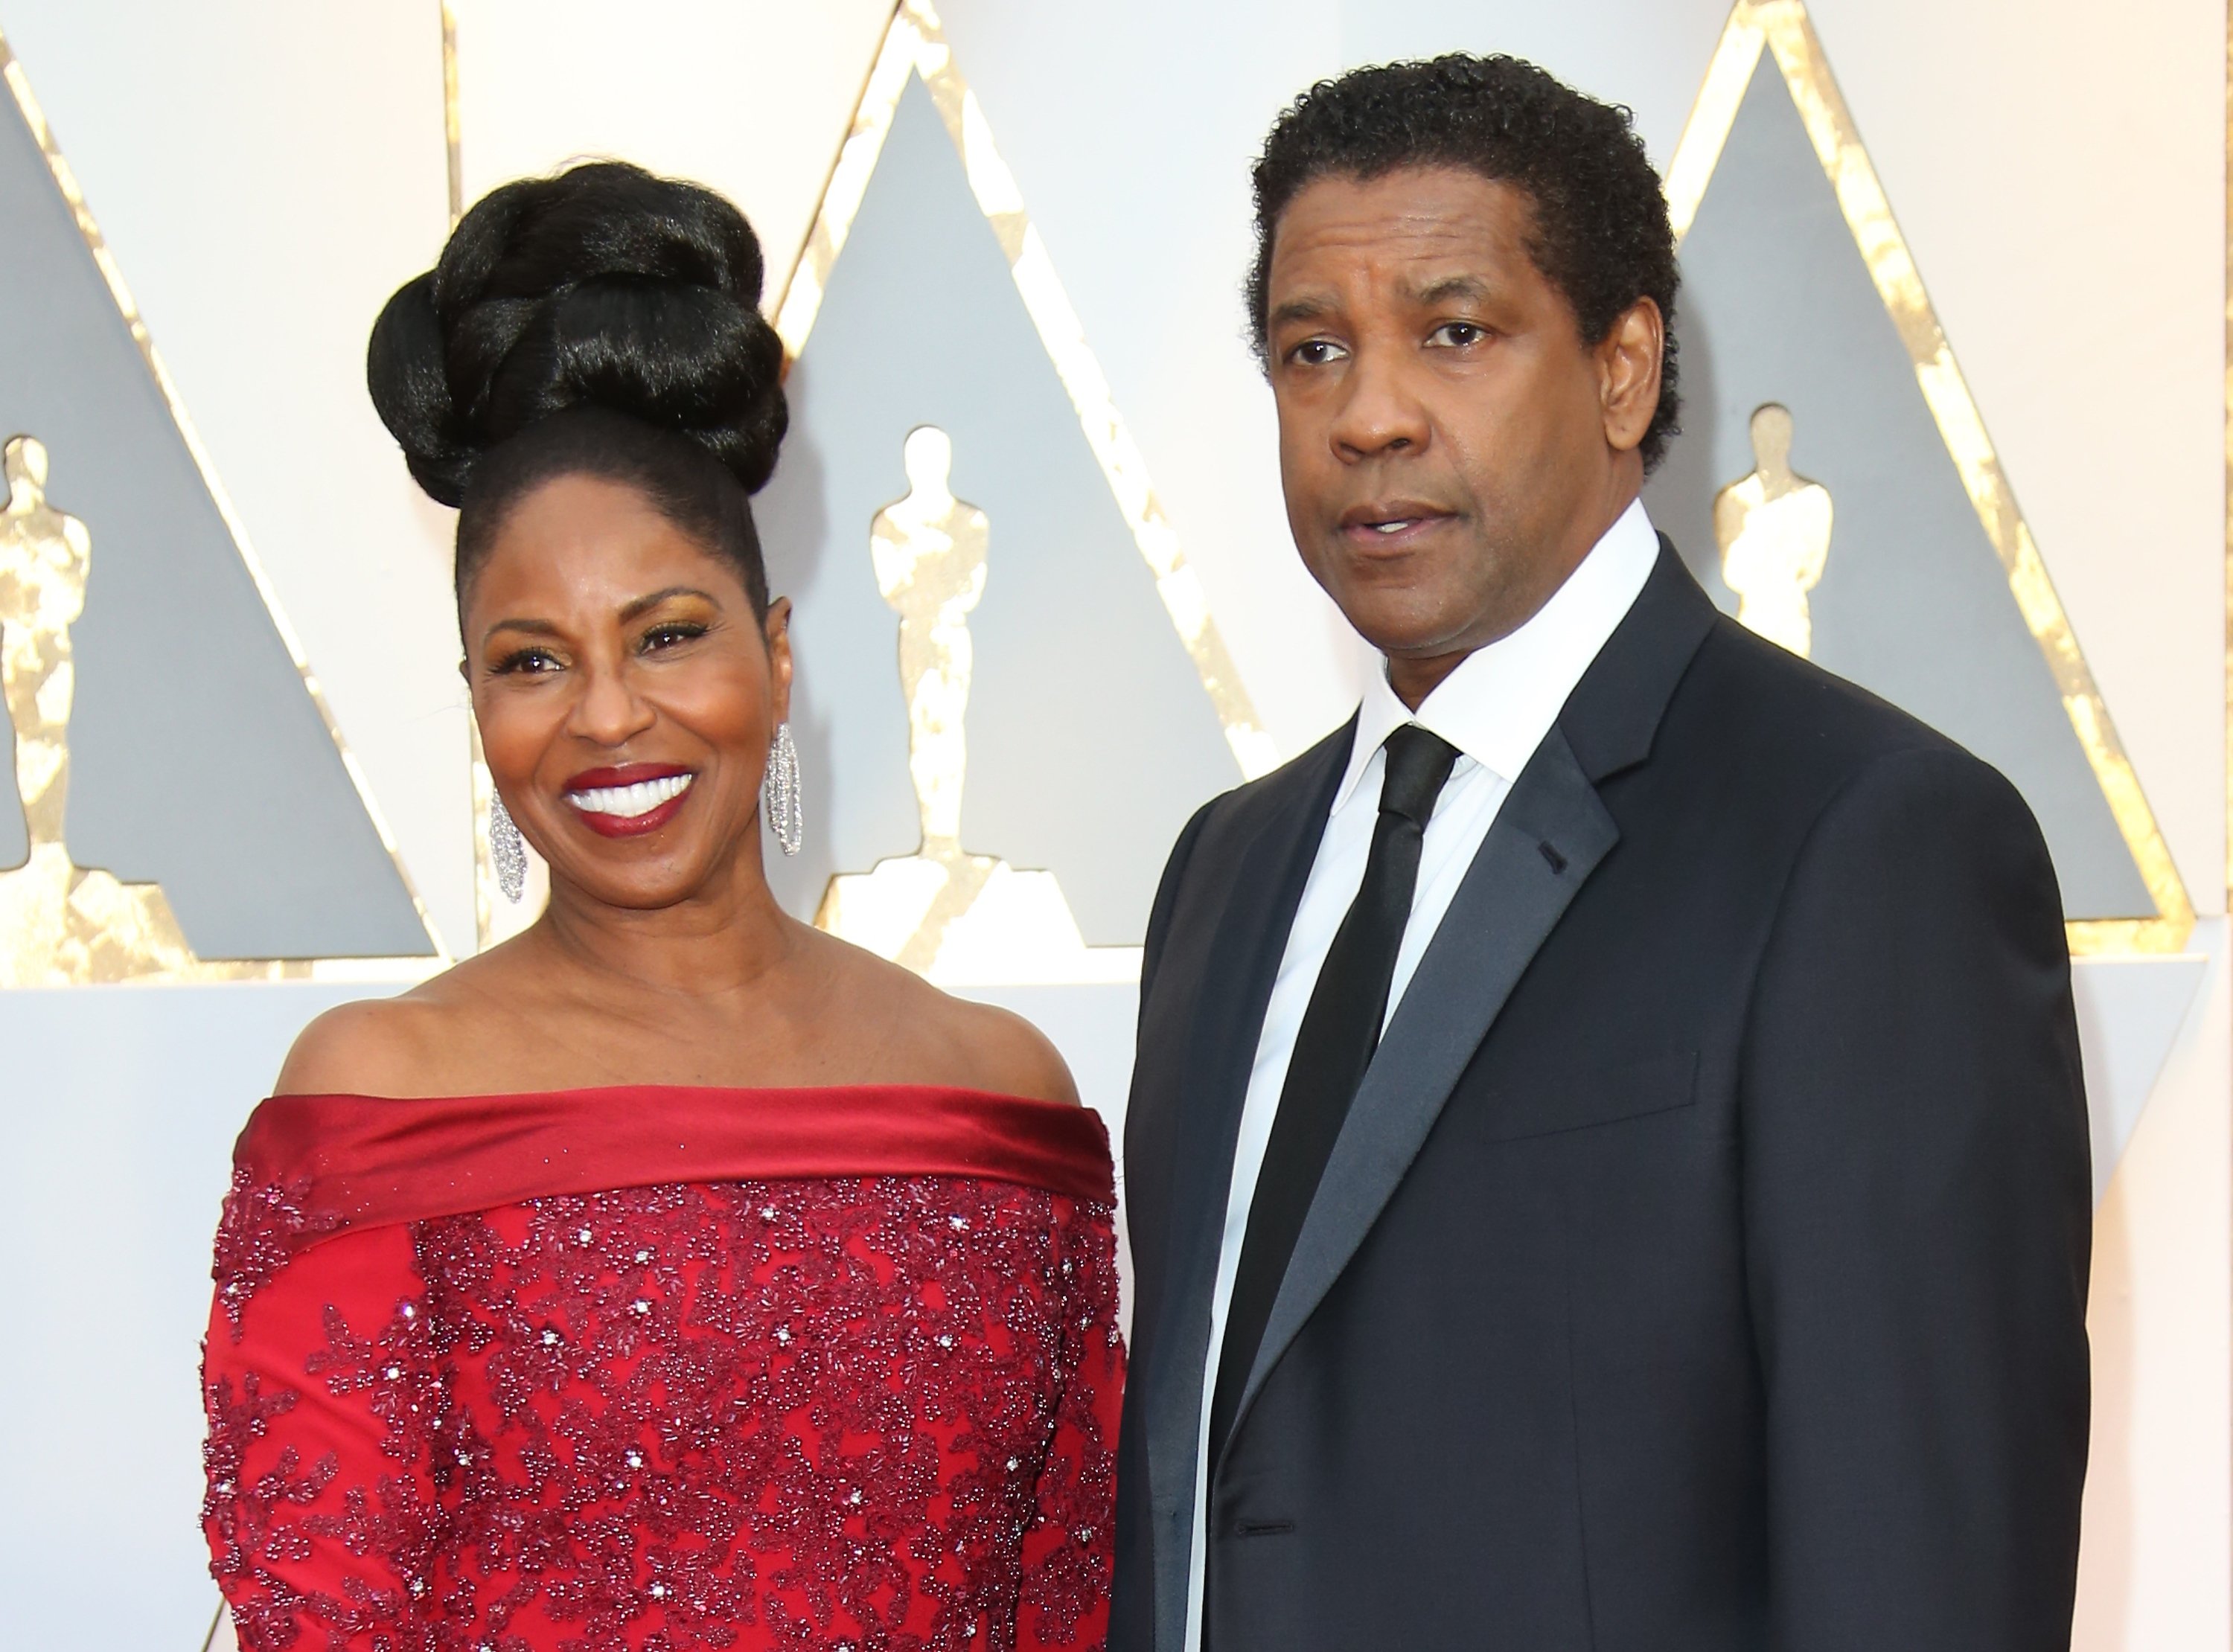 Denzel Washington with his wife Pauletta in Hollywood in 2016. | Source: Getty Images